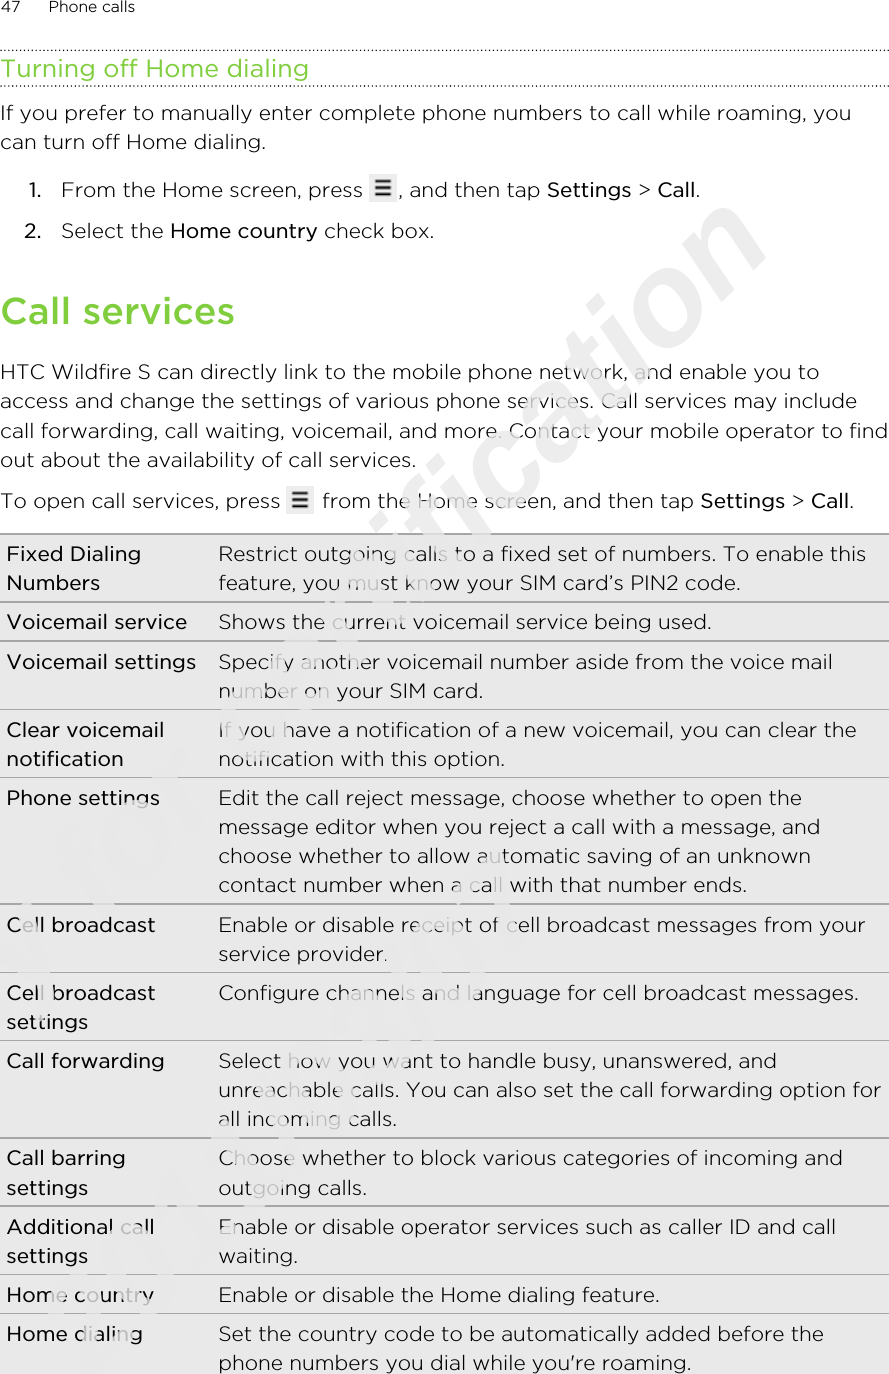 Turning off Home dialingIf you prefer to manually enter complete phone numbers to call while roaming, youcan turn off Home dialing.1. From the Home screen, press  , and then tap Settings &gt; Call.2. Select the Home country check box.Call servicesHTC Wildfire S can directly link to the mobile phone network, and enable you toaccess and change the settings of various phone services. Call services may includecall forwarding, call waiting, voicemail, and more. Contact your mobile operator to findout about the availability of call services.To open call services, press   from the Home screen, and then tap Settings &gt; Call.Fixed DialingNumbersRestrict outgoing calls to a fixed set of numbers. To enable thisfeature, you must know your SIM card’s PIN2 code.Voicemail service Shows the current voicemail service being used.Voicemail settings Specify another voicemail number aside from the voice mailnumber on your SIM card.Clear voicemailnotificationIf you have a notification of a new voicemail, you can clear thenotification with this option.Phone settings Edit the call reject message, choose whether to open themessage editor when you reject a call with a message, andchoose whether to allow automatic saving of an unknowncontact number when a call with that number ends.Cell broadcast Enable or disable receipt of cell broadcast messages from yourservice provider.Cell broadcastsettingsConfigure channels and language for cell broadcast messages.Call forwarding Select how you want to handle busy, unanswered, andunreachable calls. You can also set the call forwarding option forall incoming calls.Call barringsettingsChoose whether to block various categories of incoming andoutgoing calls.Additional callsettingsEnable or disable operator services such as caller ID and callwaiting.Home country Enable or disable the Home dialing feature.Home dialing Set the country code to be automatically added before thephone numbers you dial while you&apos;re roaming.47 Phone callsOnly for certification  2011/03/07